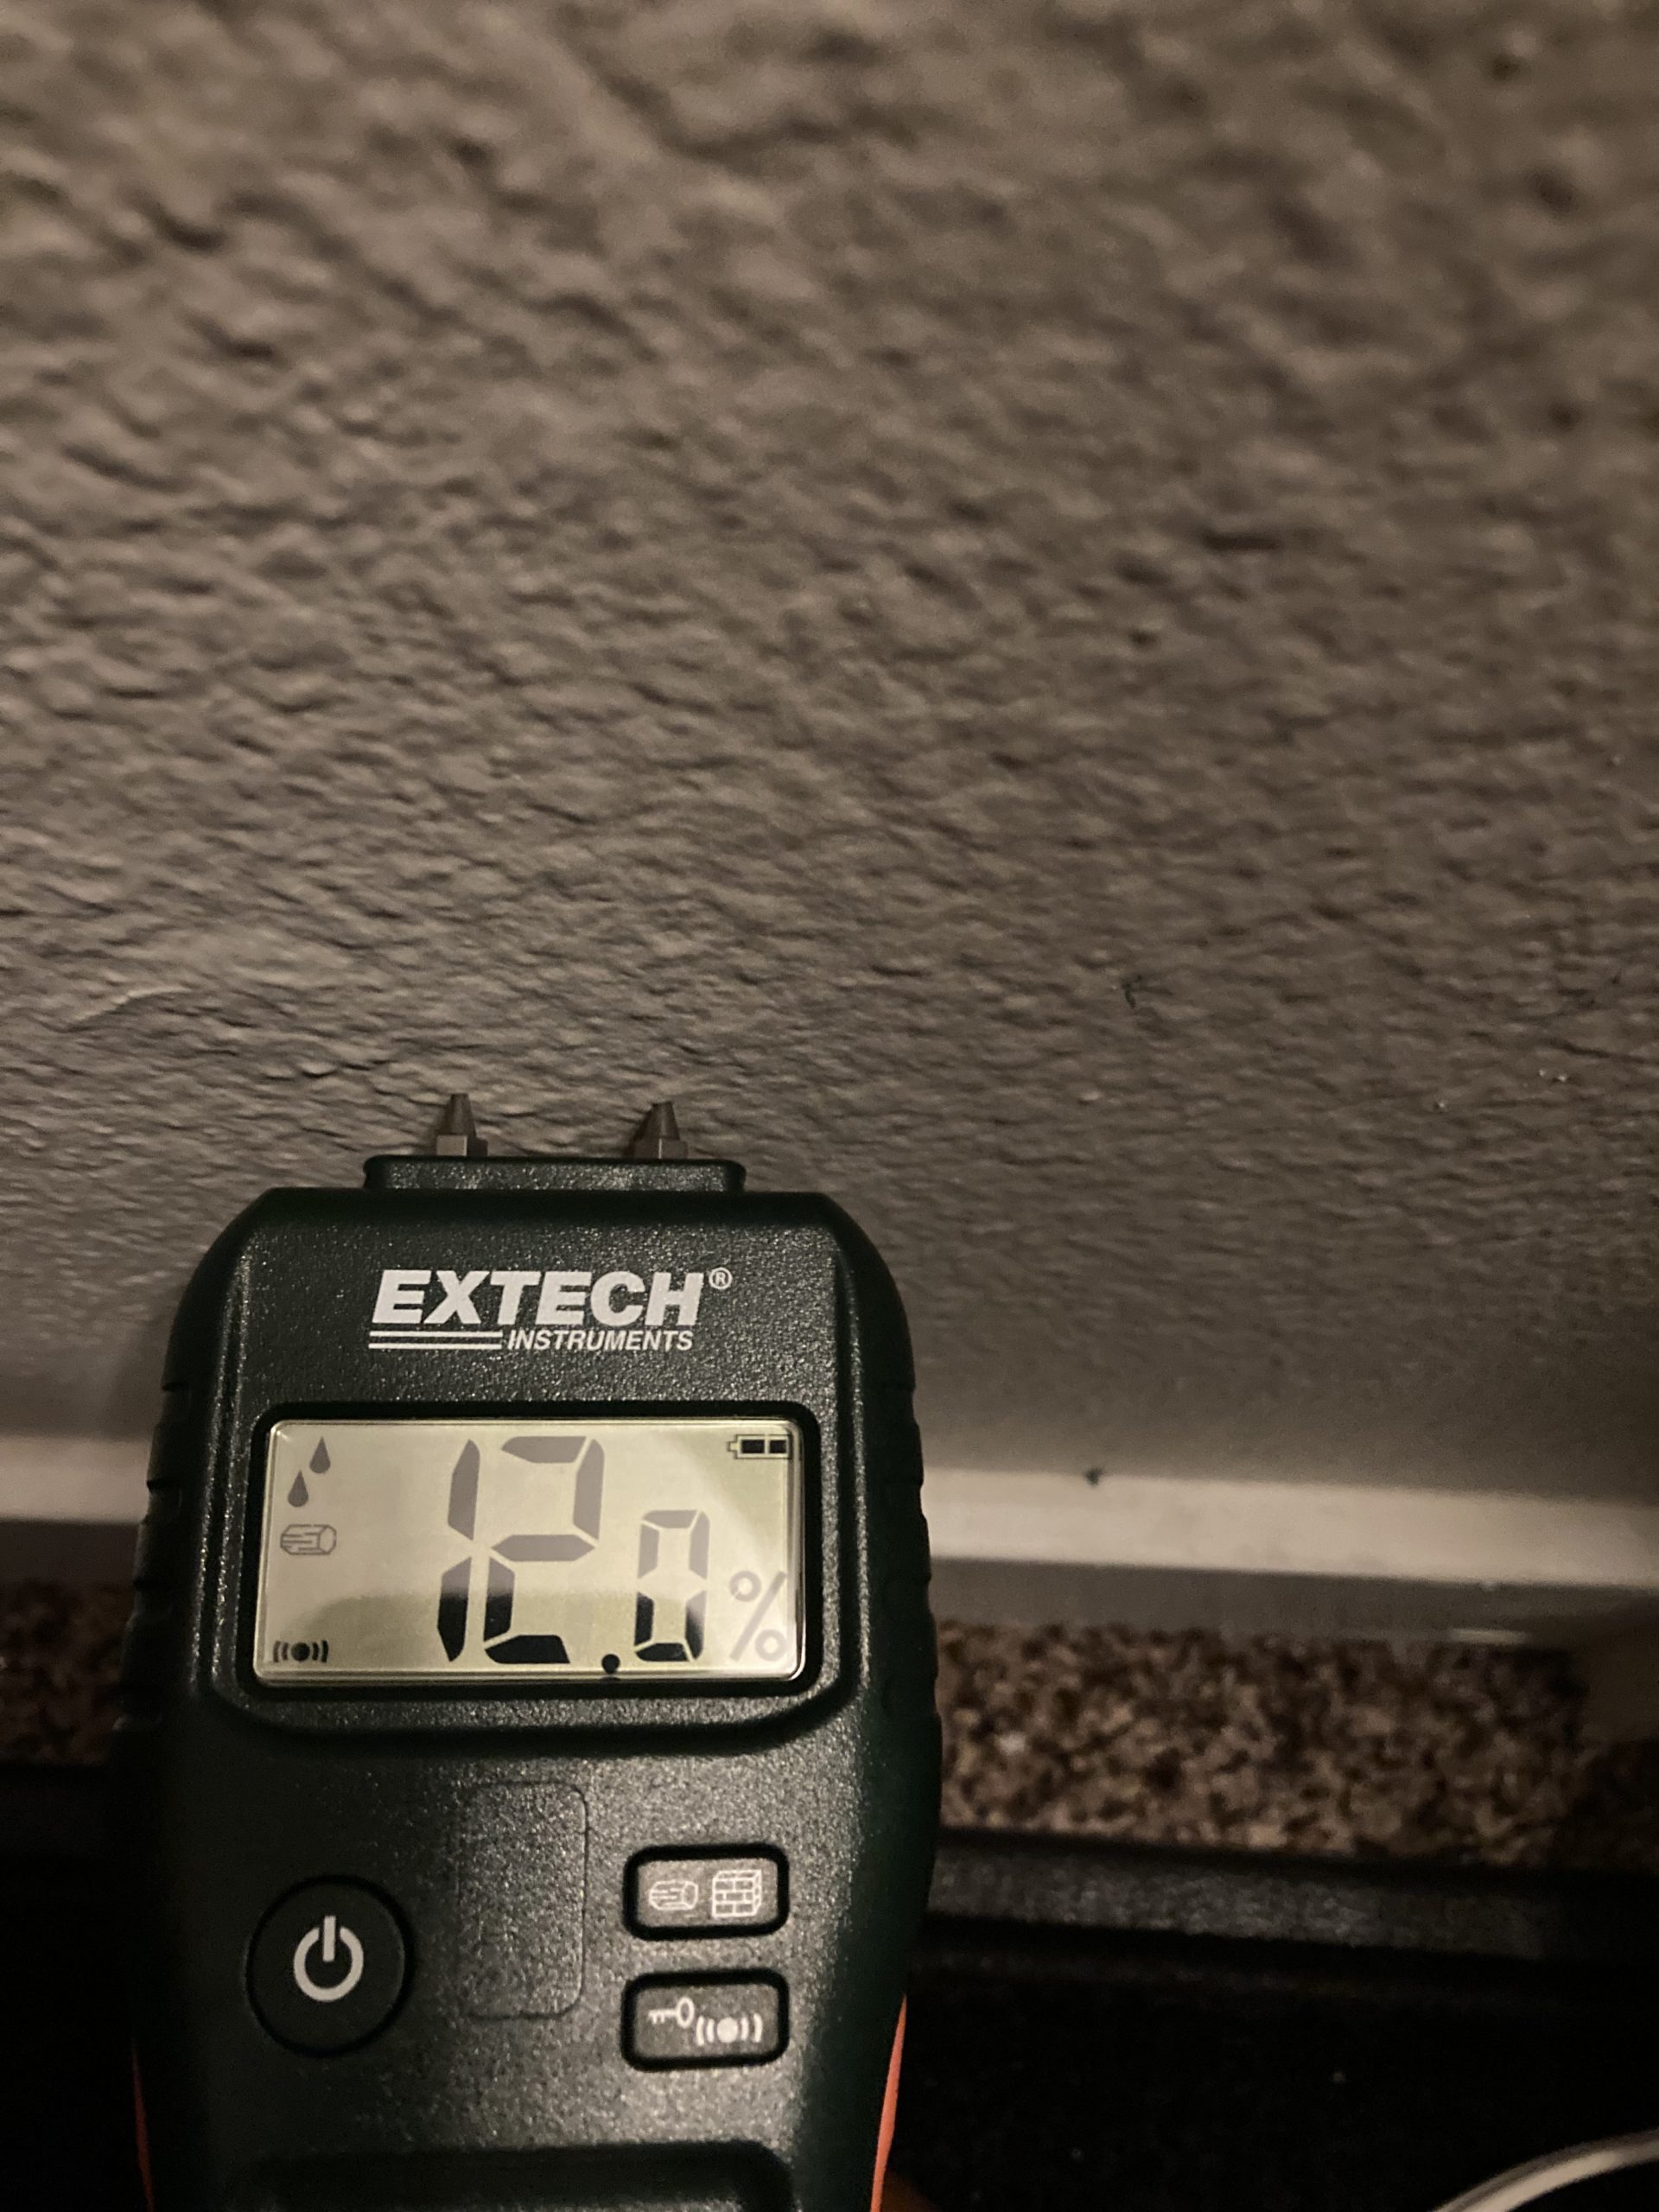 Is a mold inspection worth it?